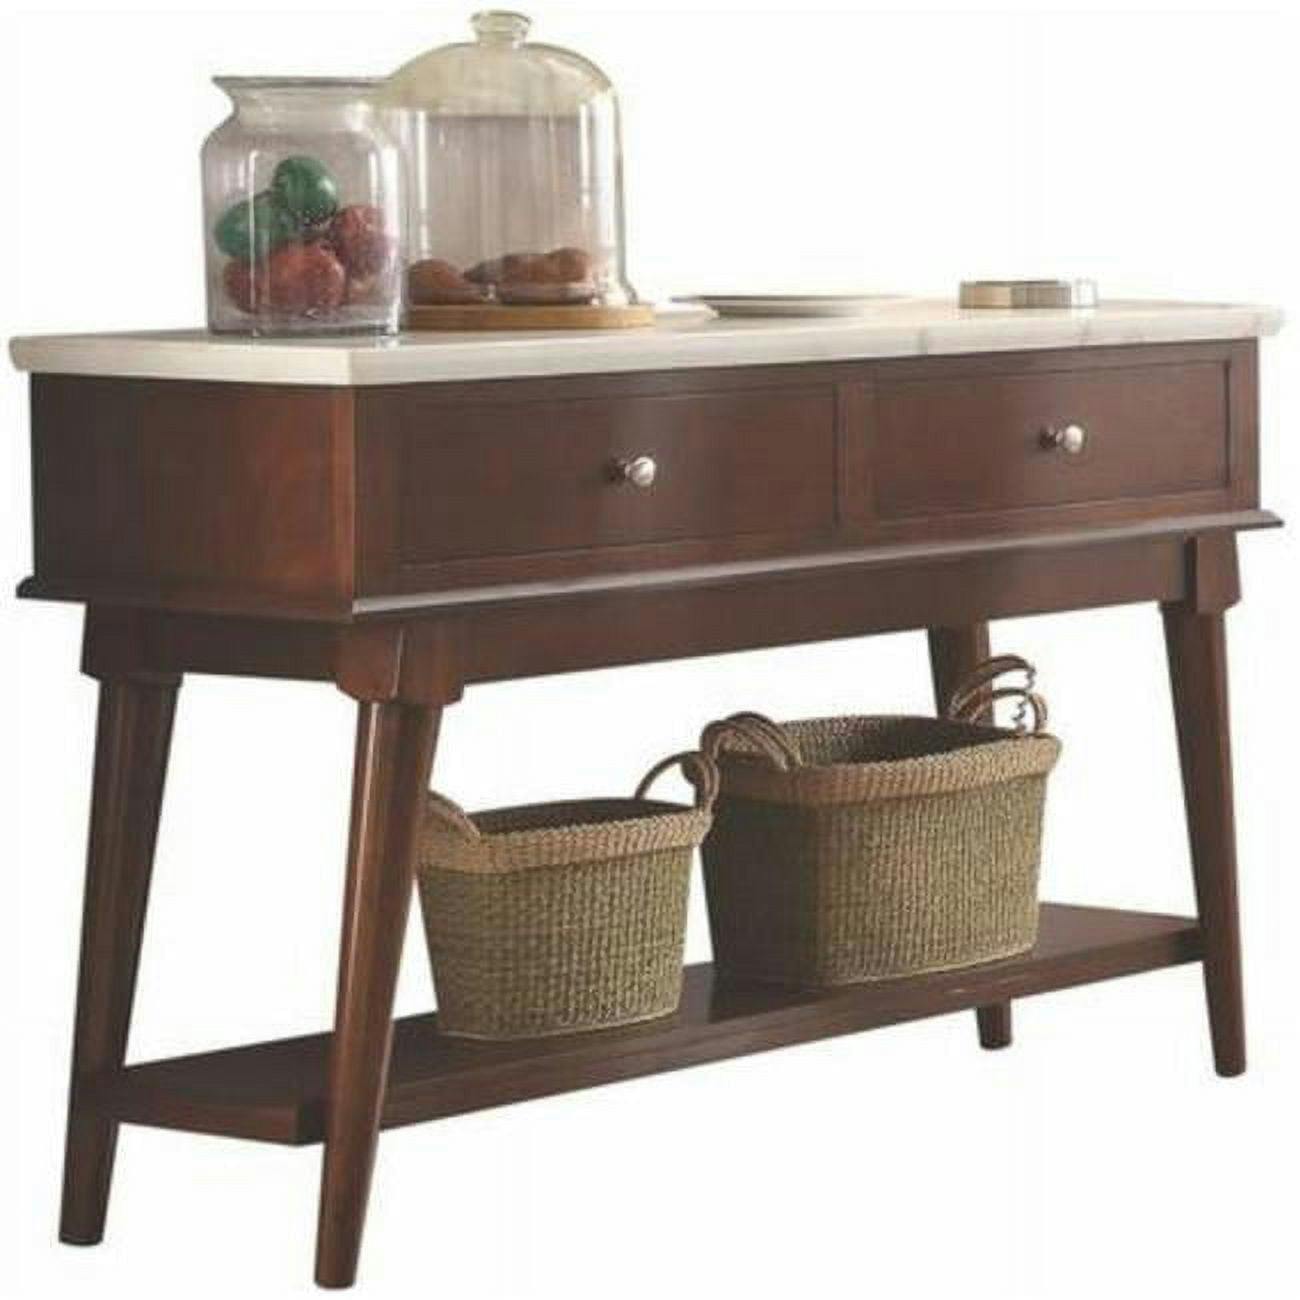 Elegant Walnut Brown Wooden Server with White Marble Top - 51" Length